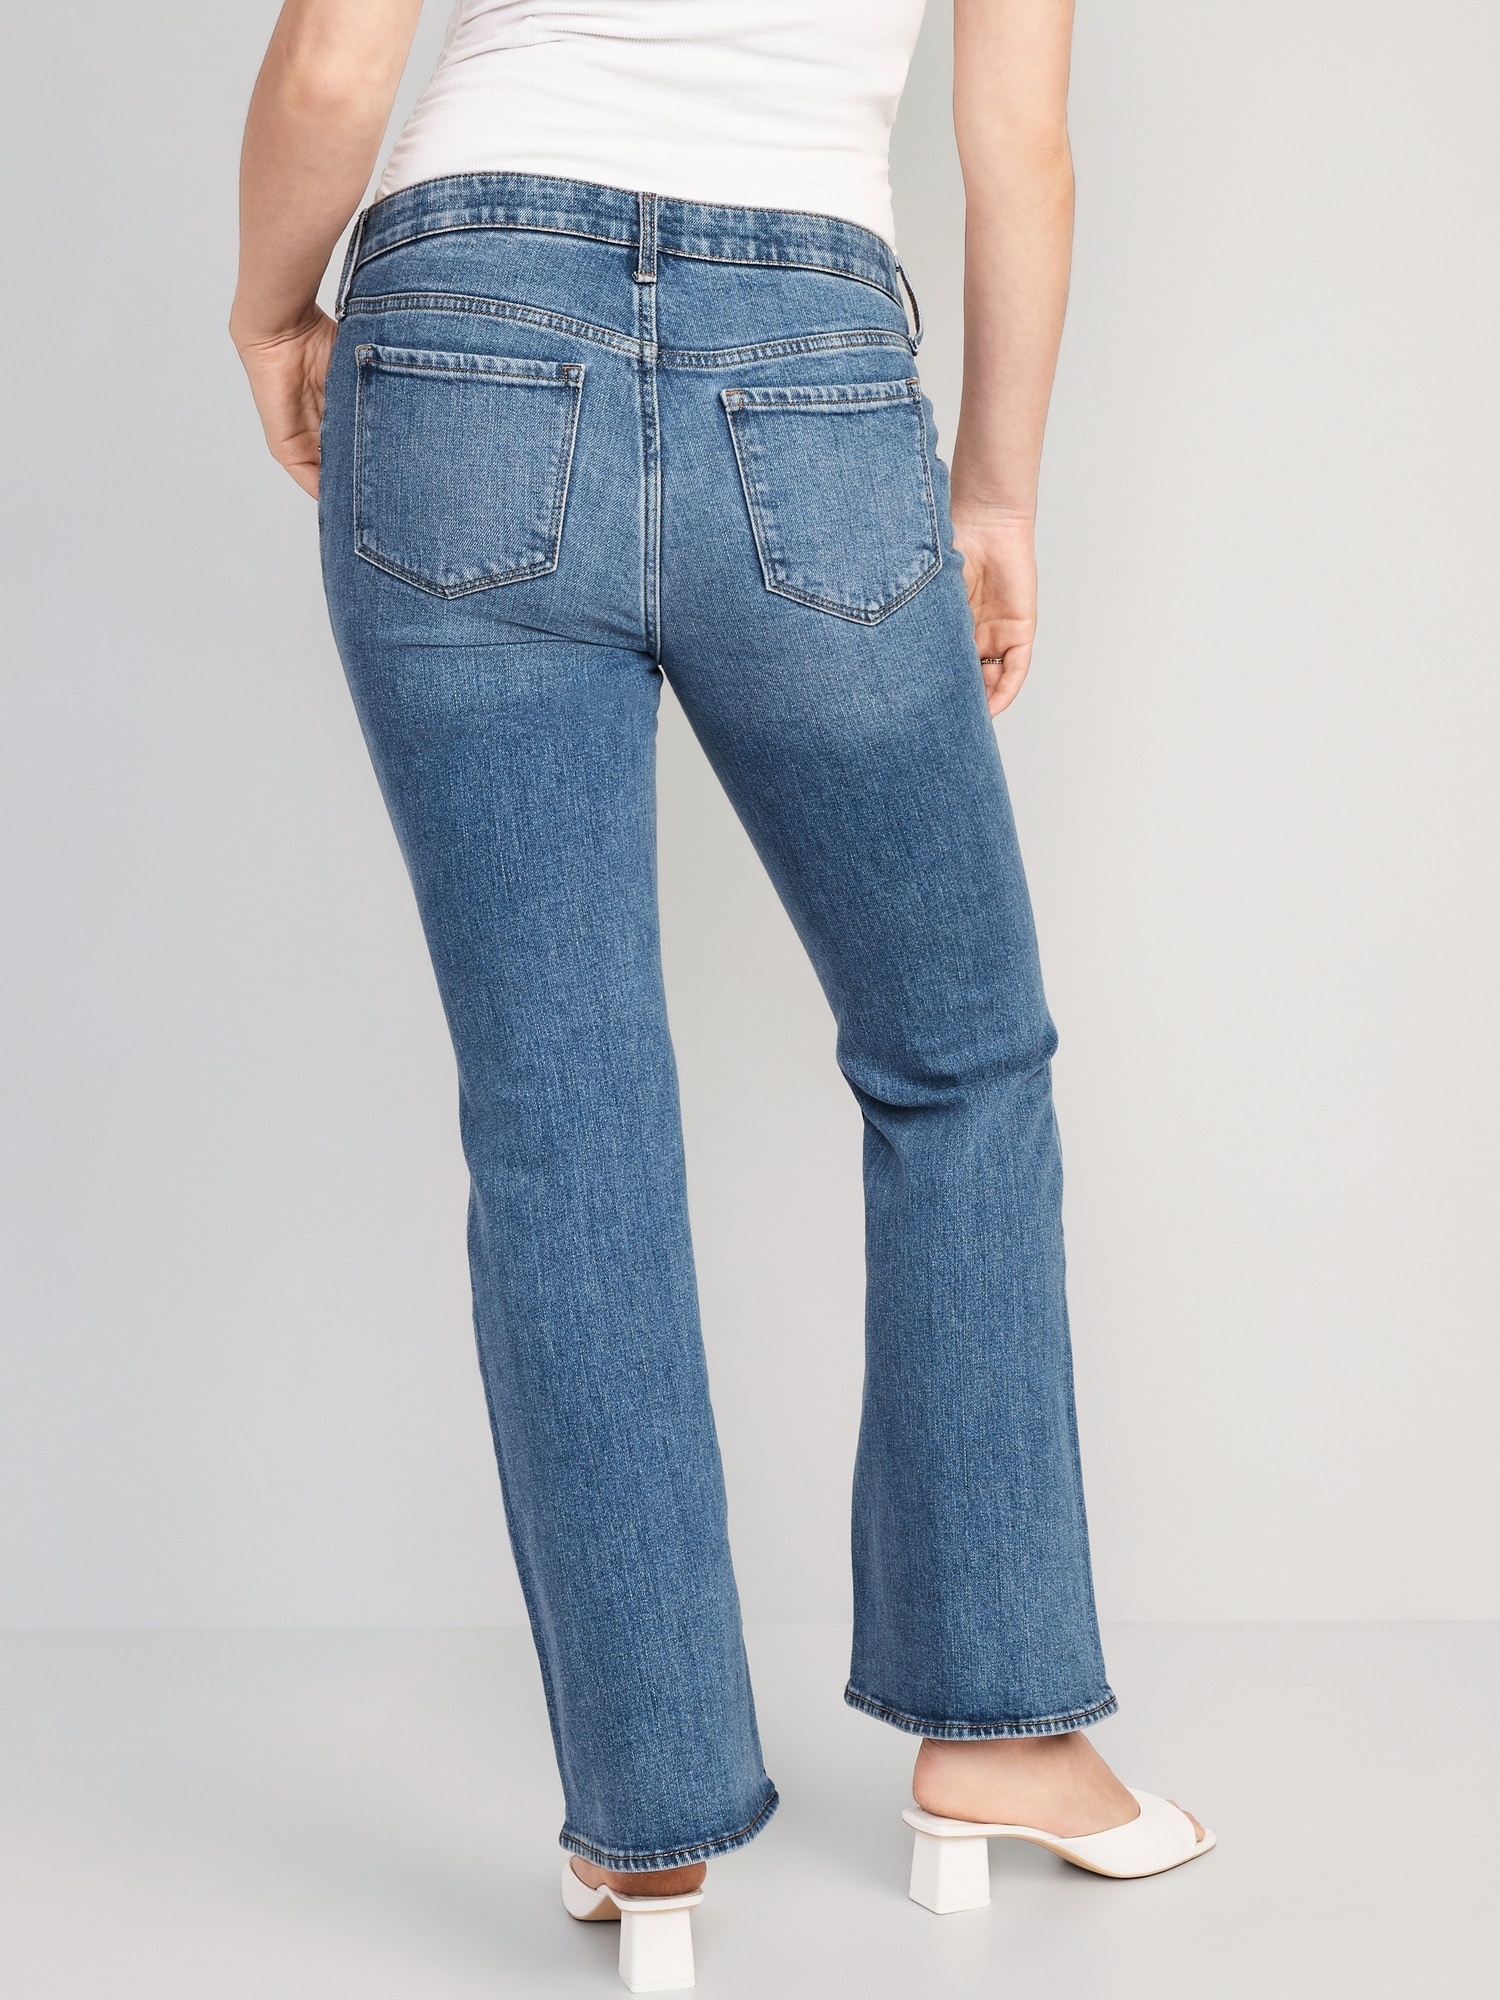 Maternity Front-Low Panel Navy Old Jeans Flare 